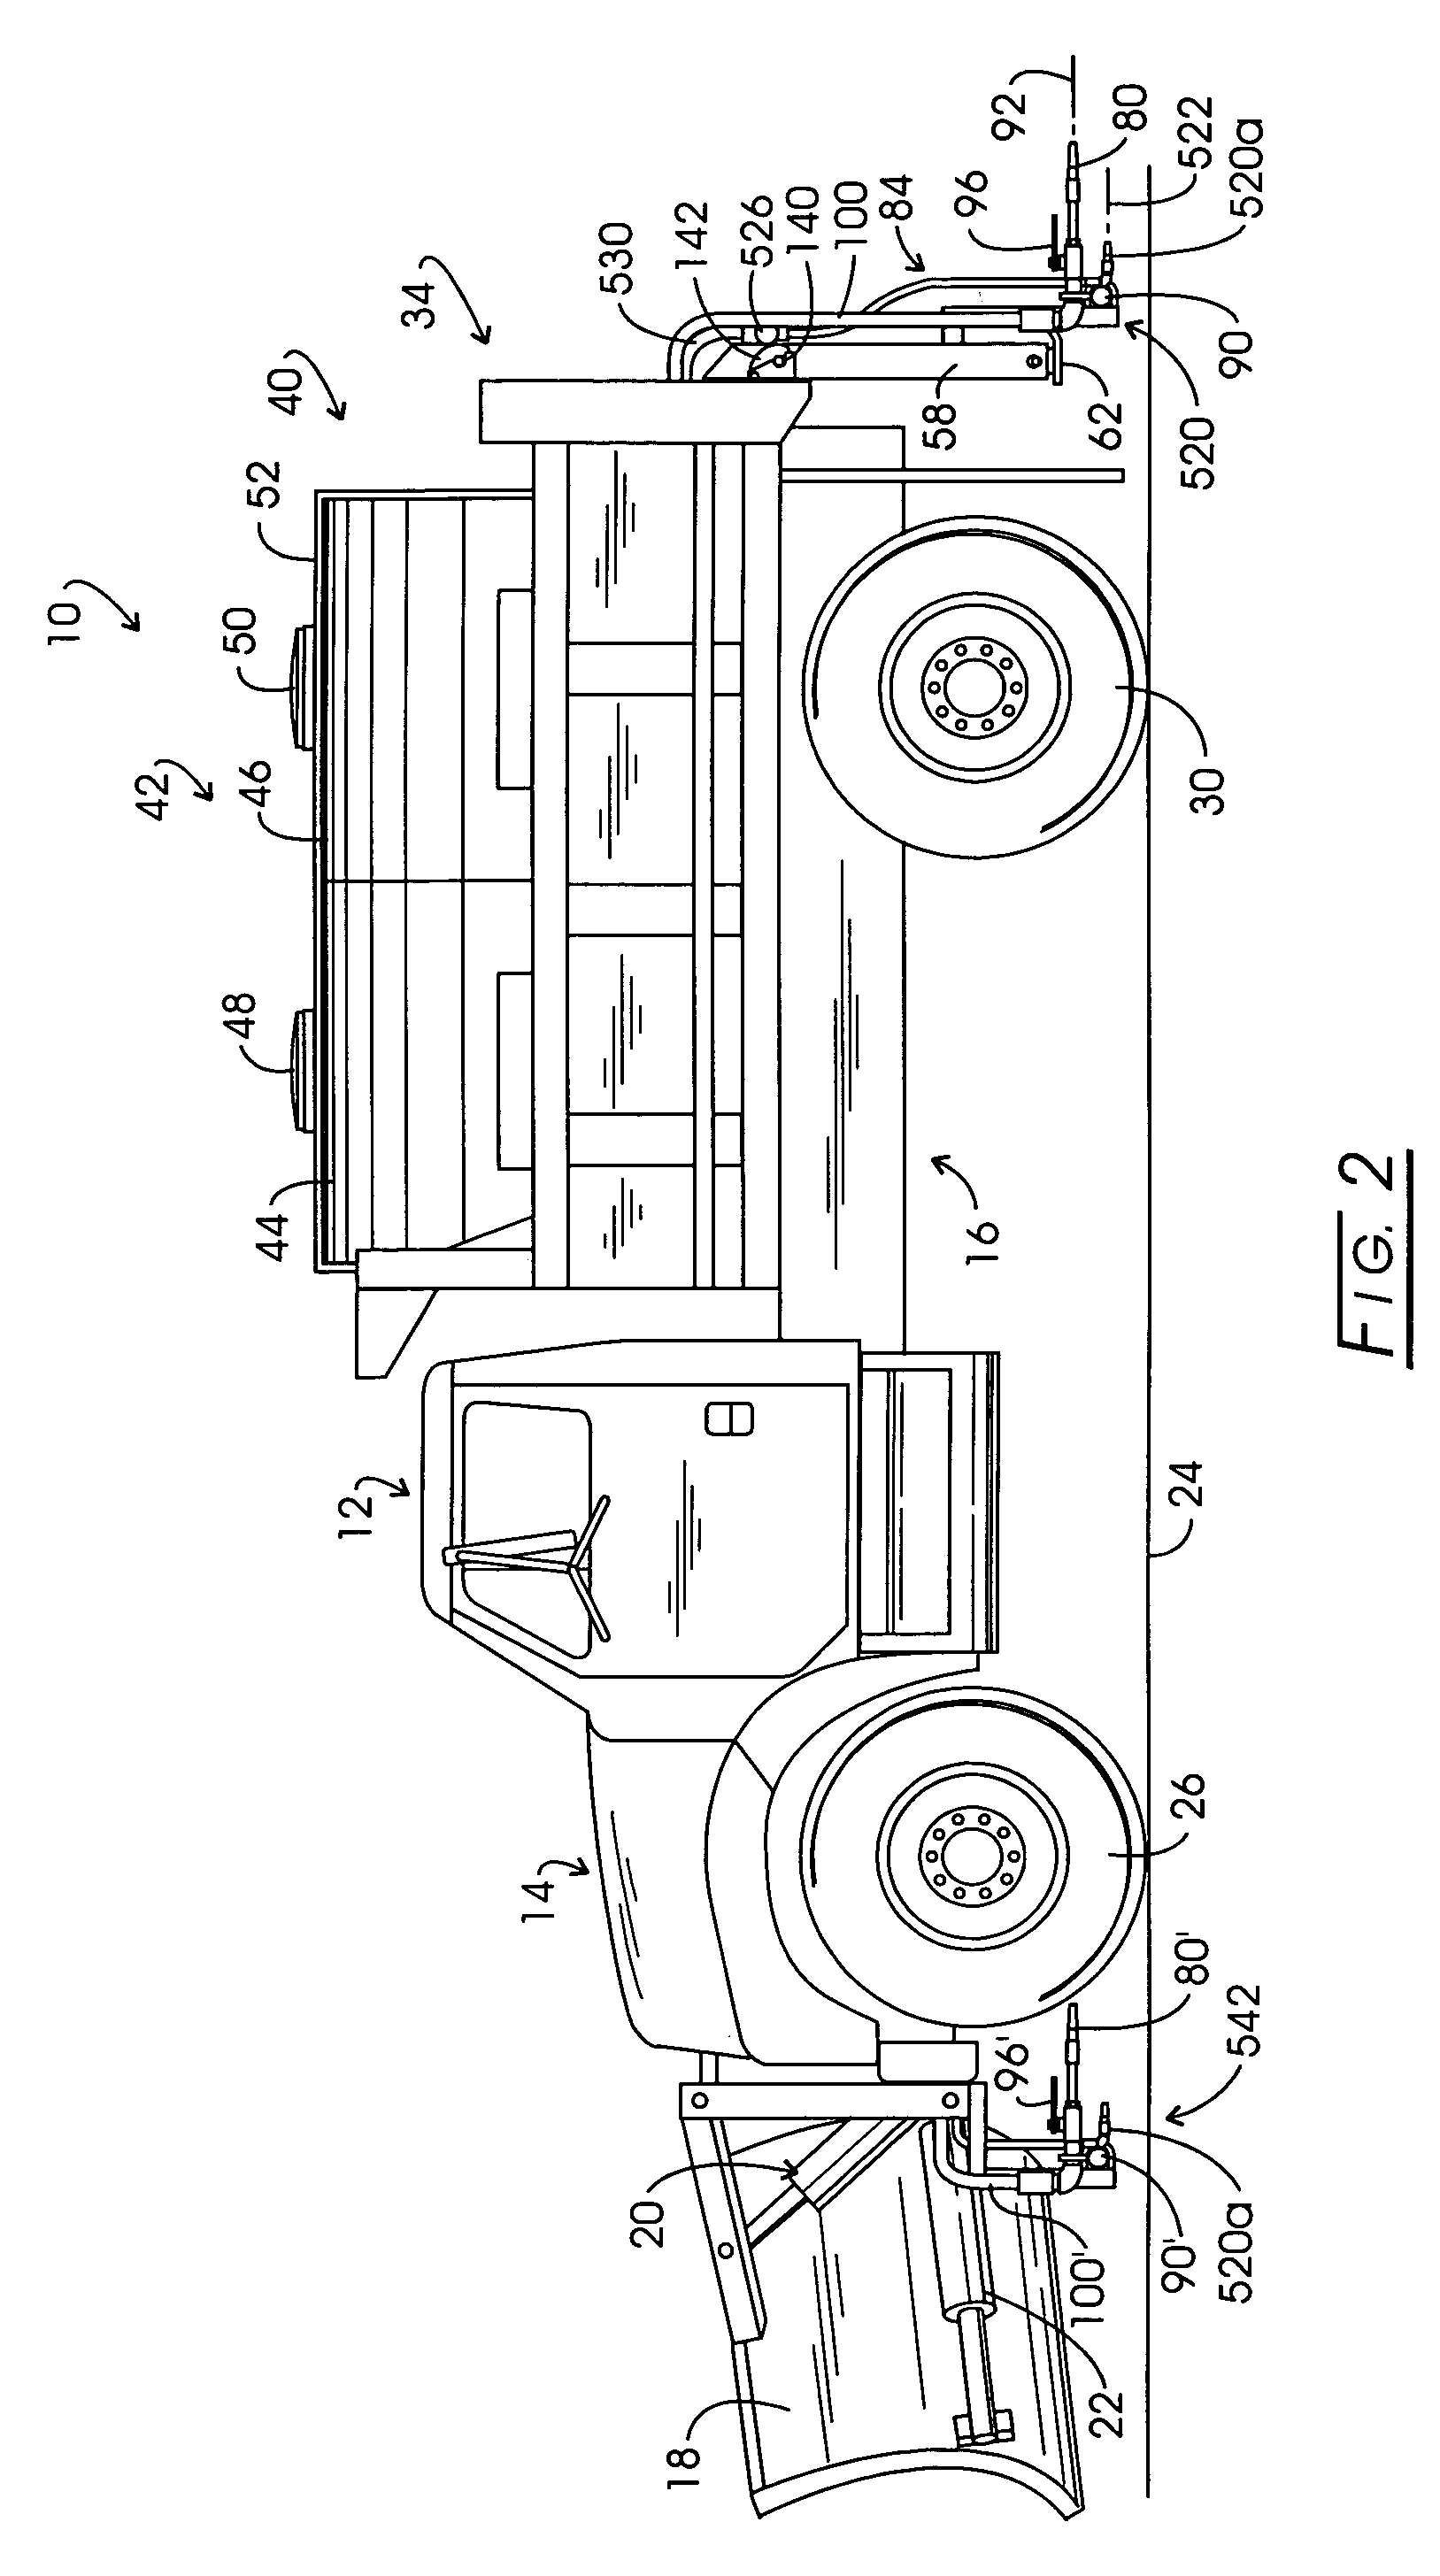 Method and apparatus for depositing snow-ice treatment liquid on pavement